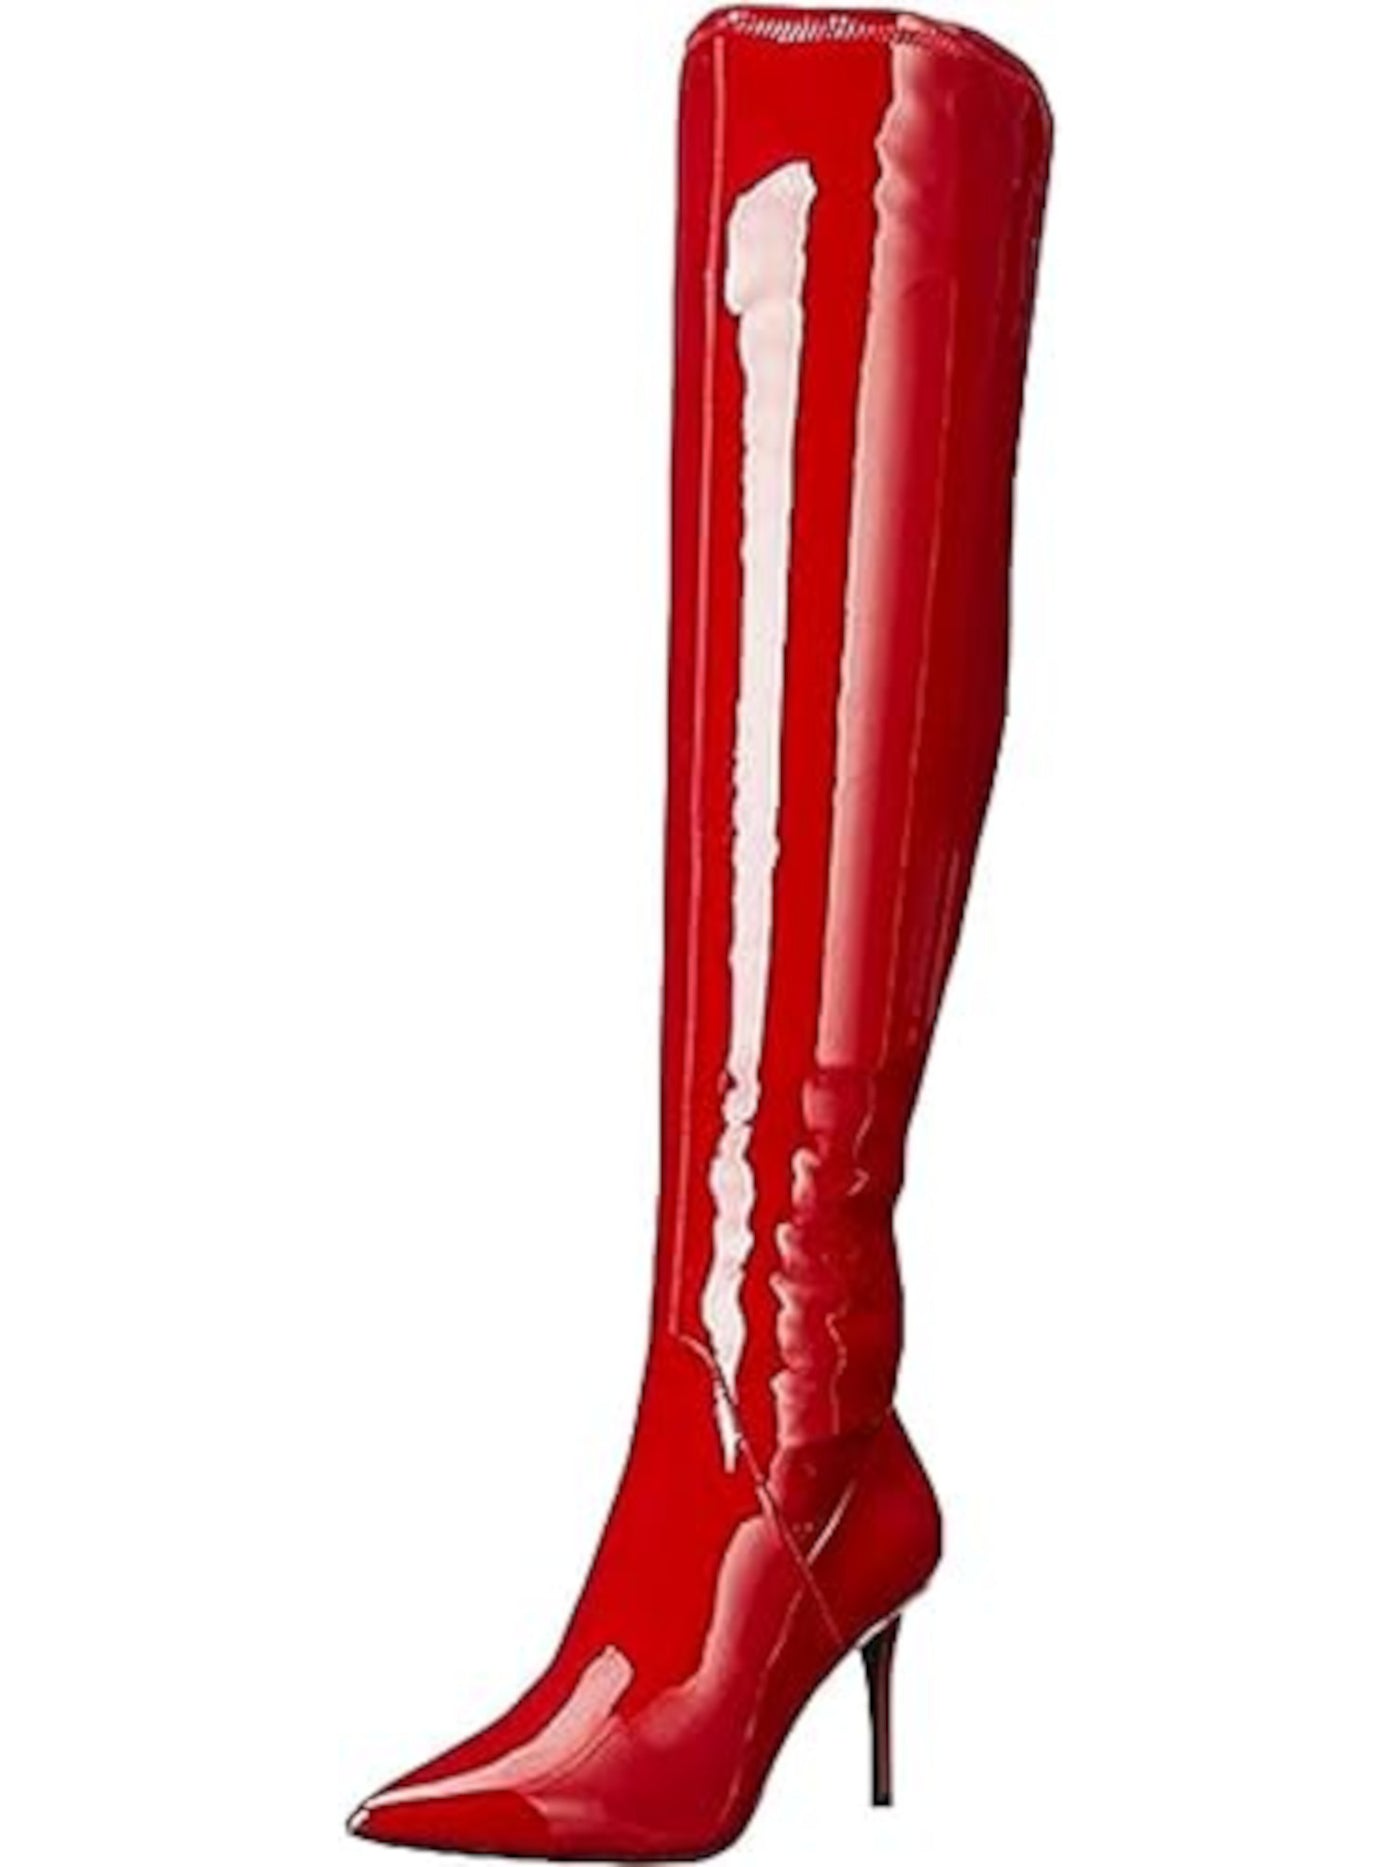 JESSICA SIMPSON Womens Red Cushioned Abrine Pointed Toe Stiletto Zip-Up Dress Boots 6.5 M